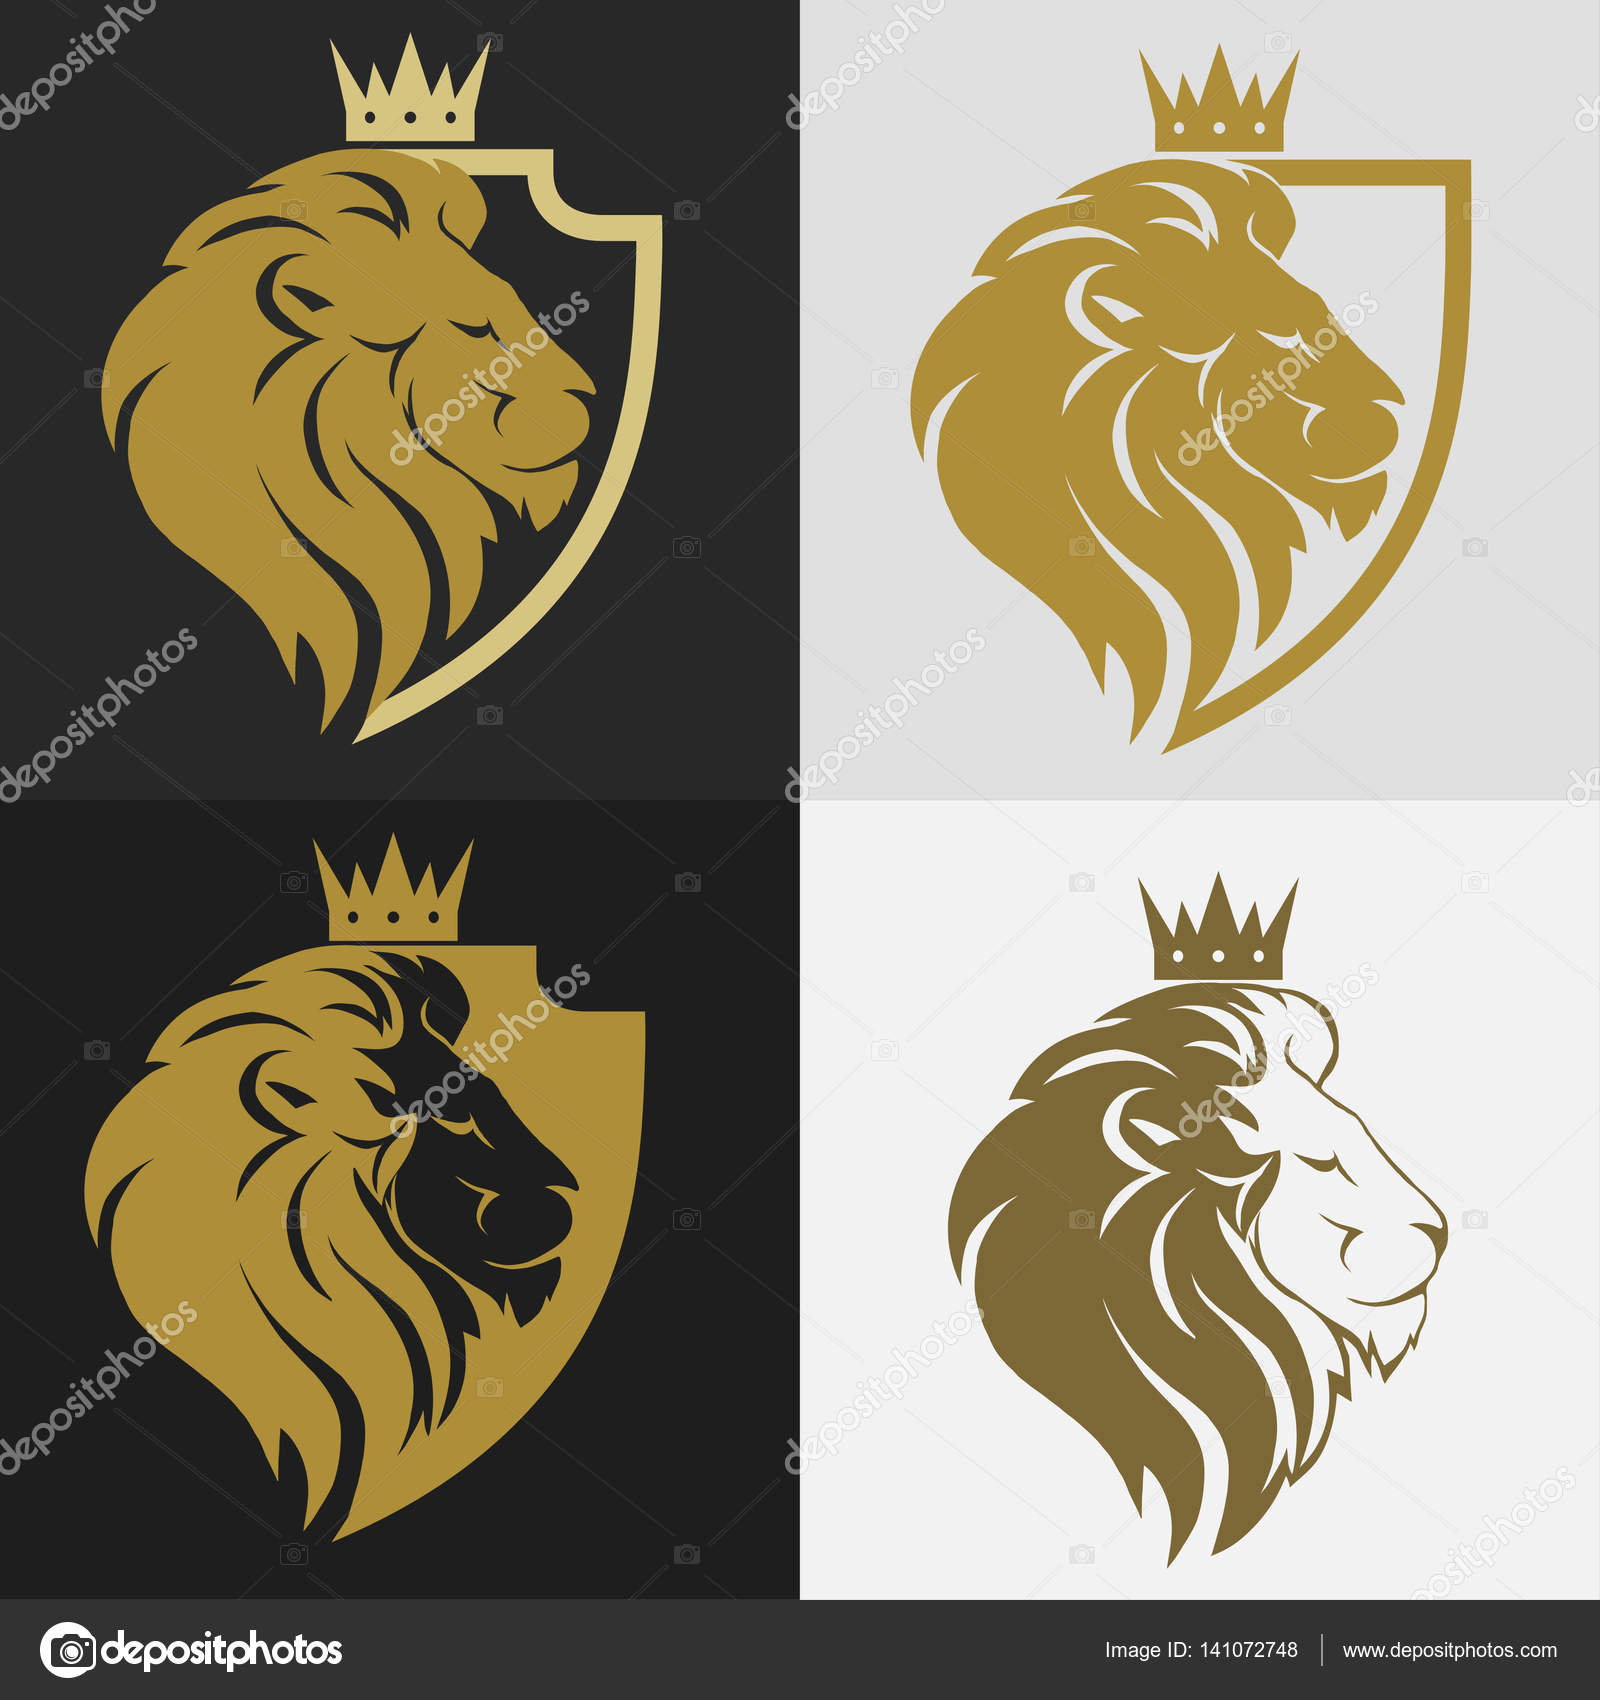 Download 4 436 Lion With Crown Vector Images Free Royalty Free Lion With Crown Vectors Depositphotos